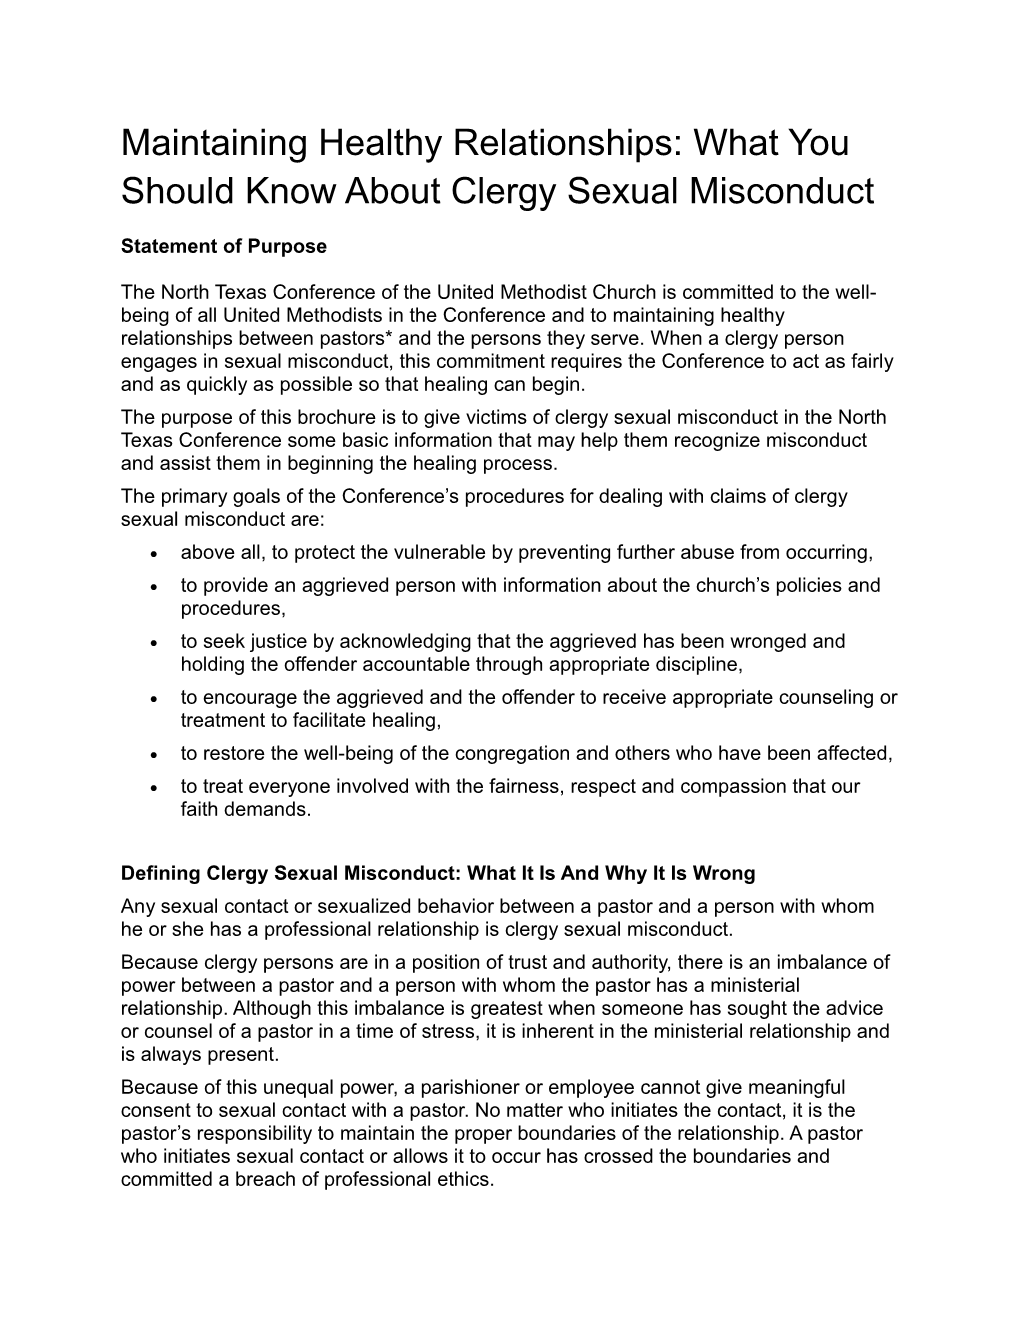 Maintaining Healthy Relationships: What You Should Know About Clergy Sexual Misconduct